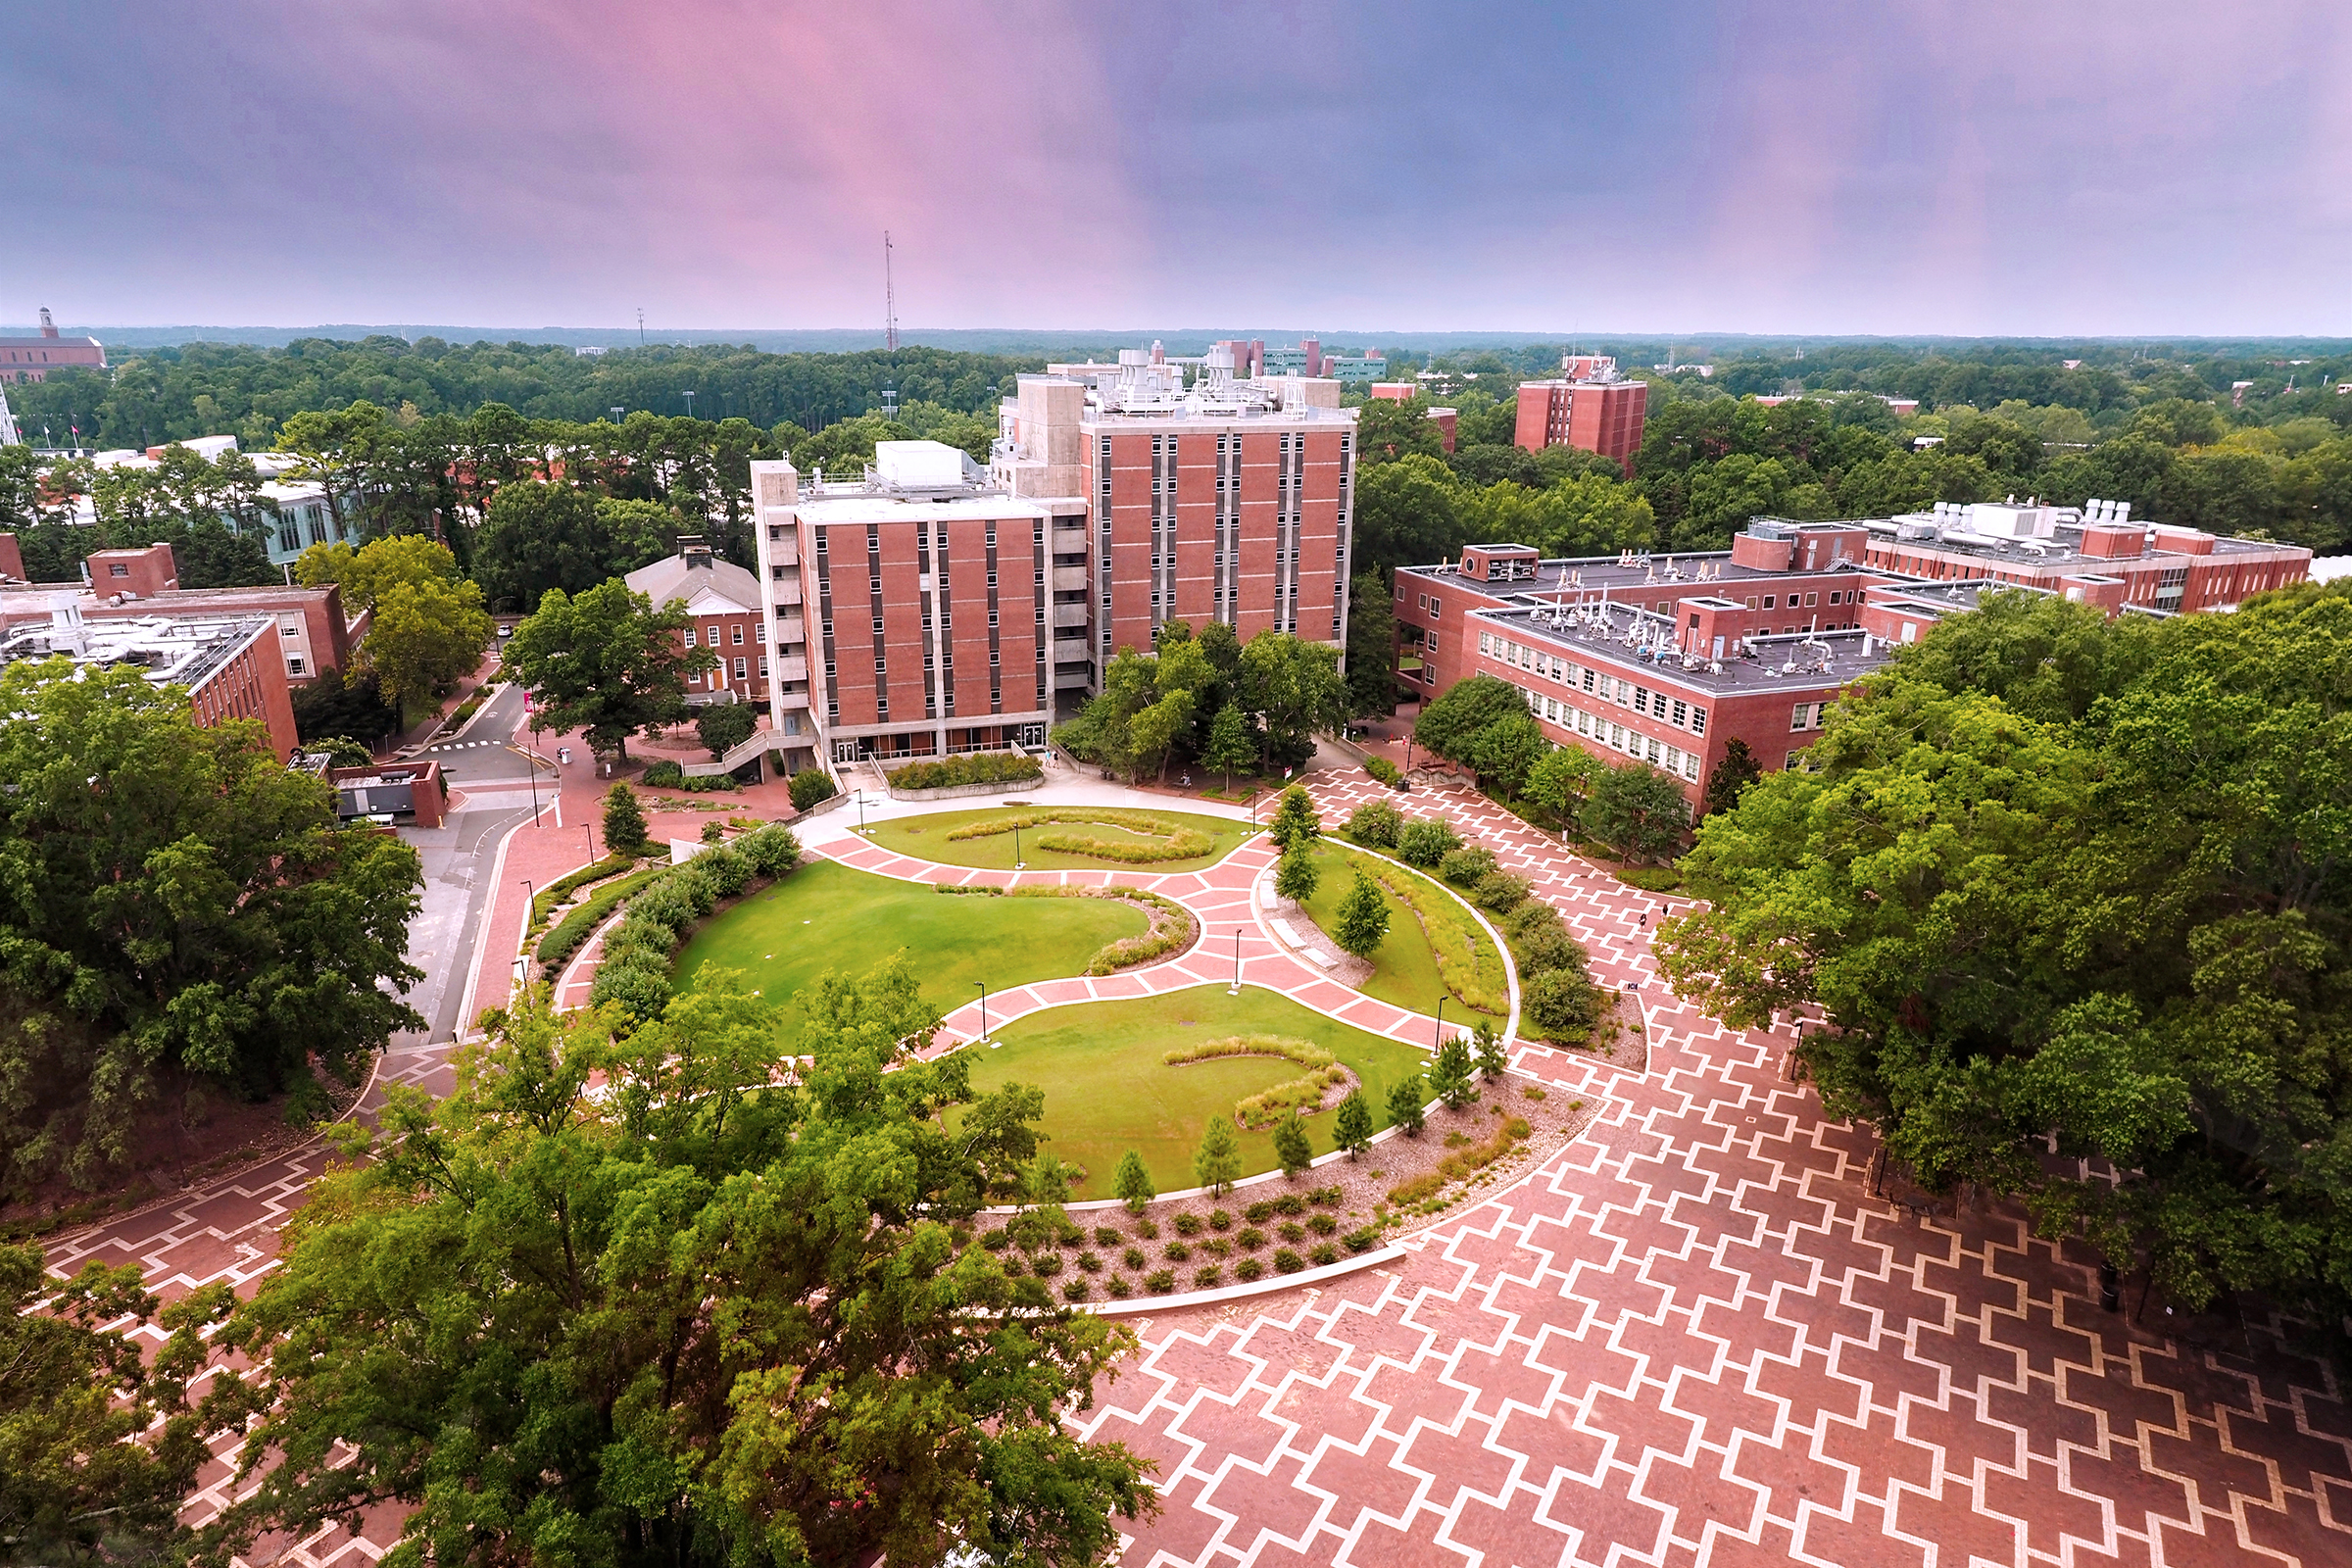 What Stands Out at NC State?